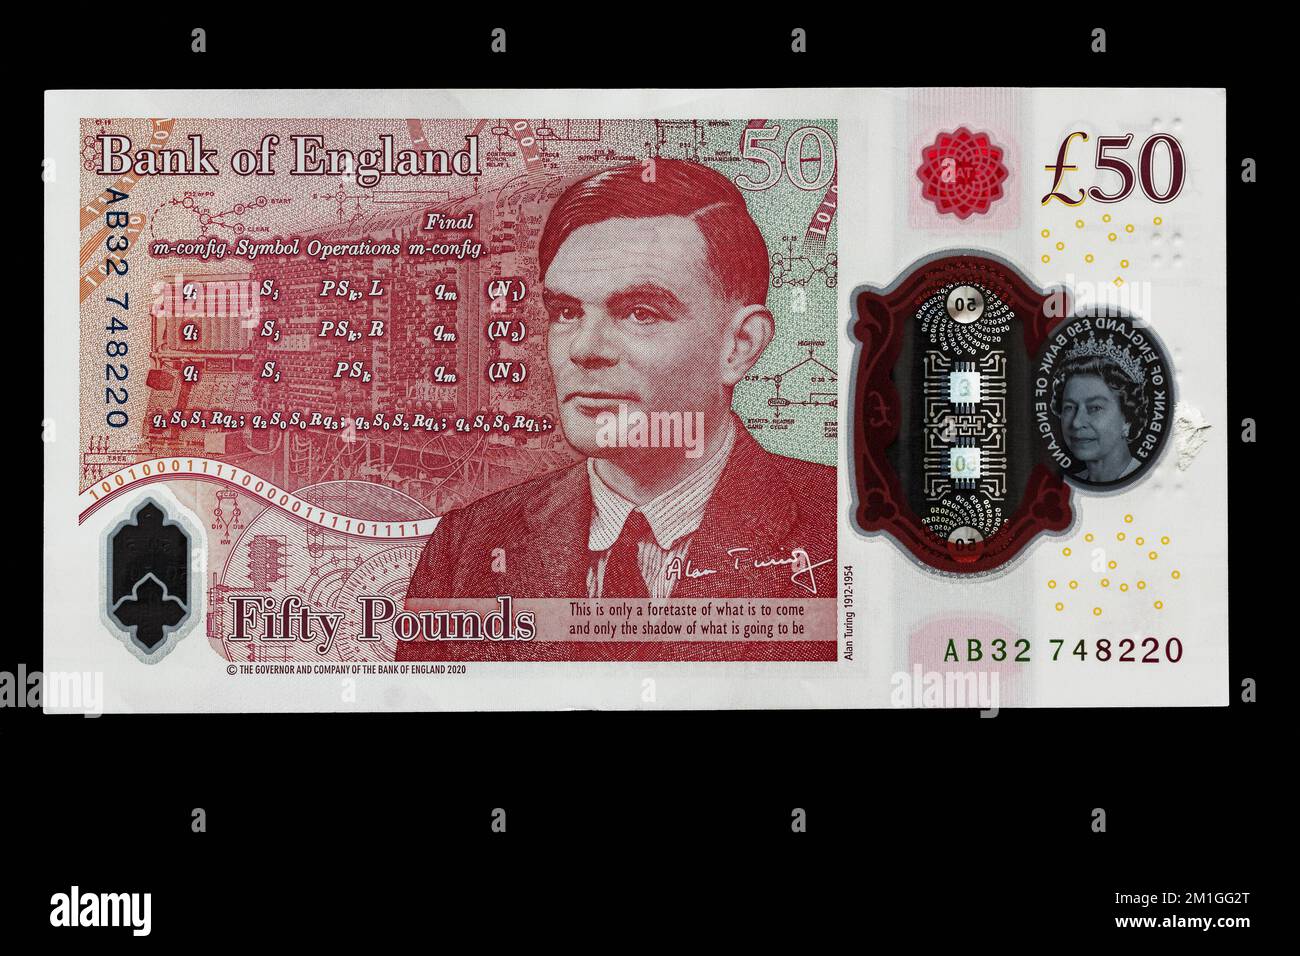 The £50 note released on 23rd June 2021, Alan Turing's birthday. Stock Photo